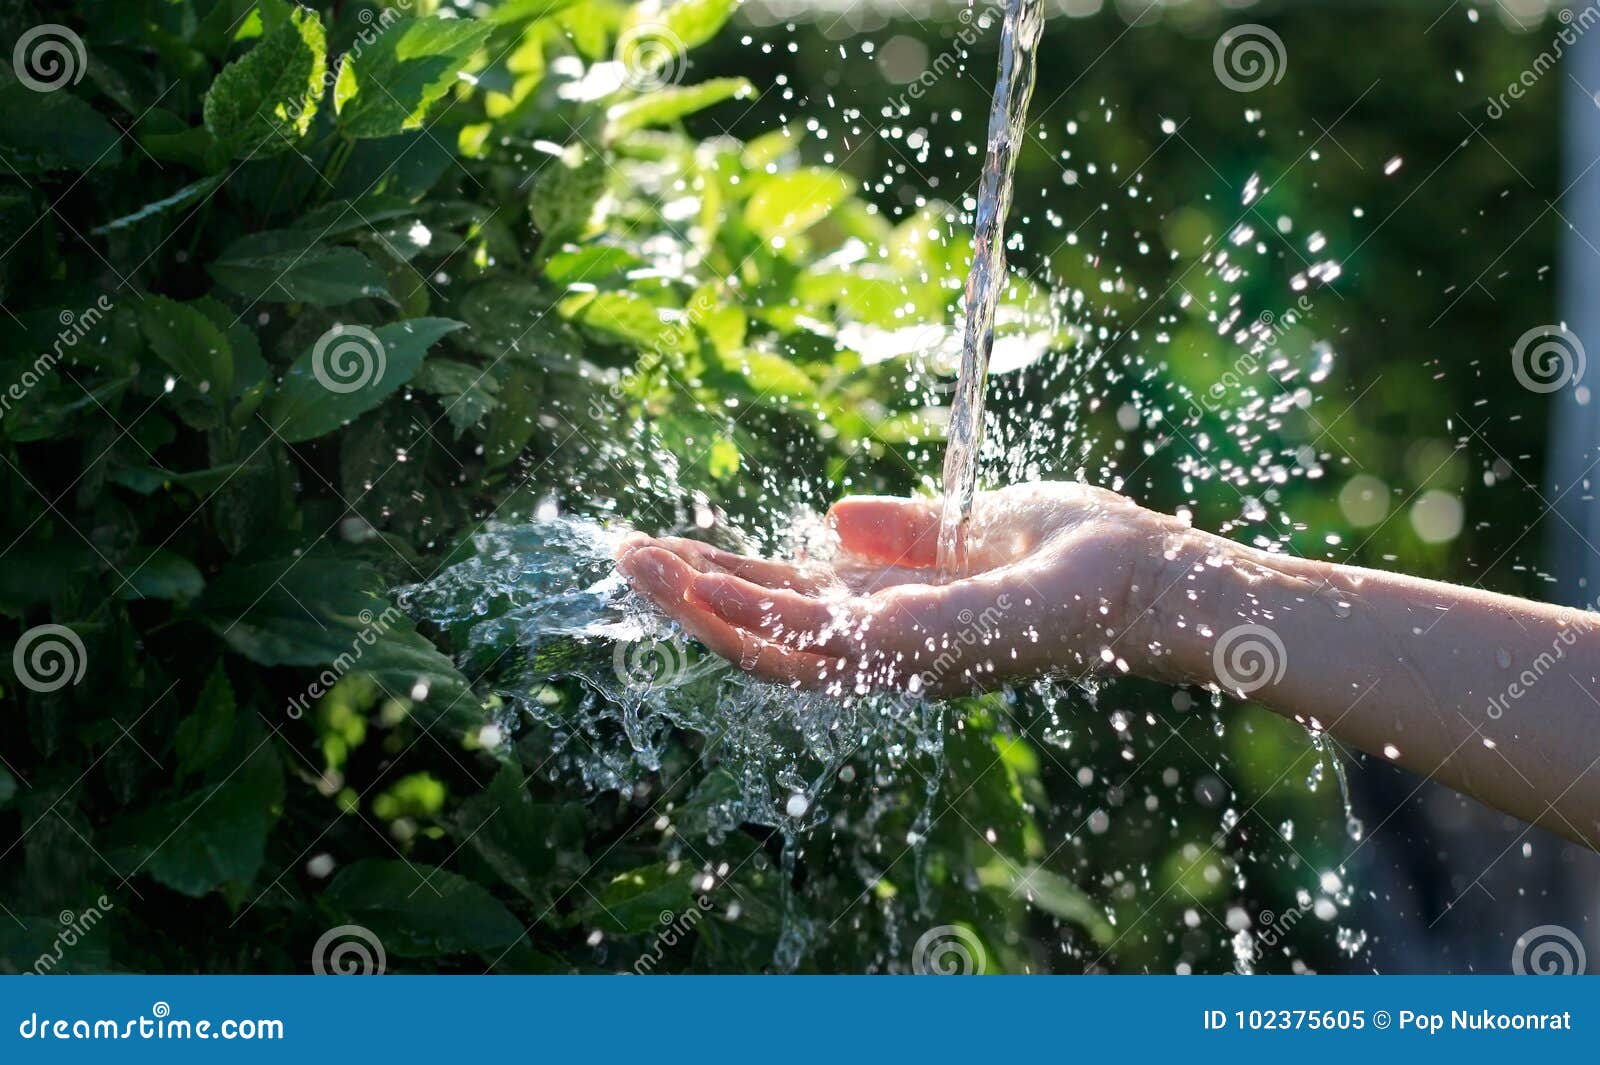 water pouring in human hand on nature, environment issue